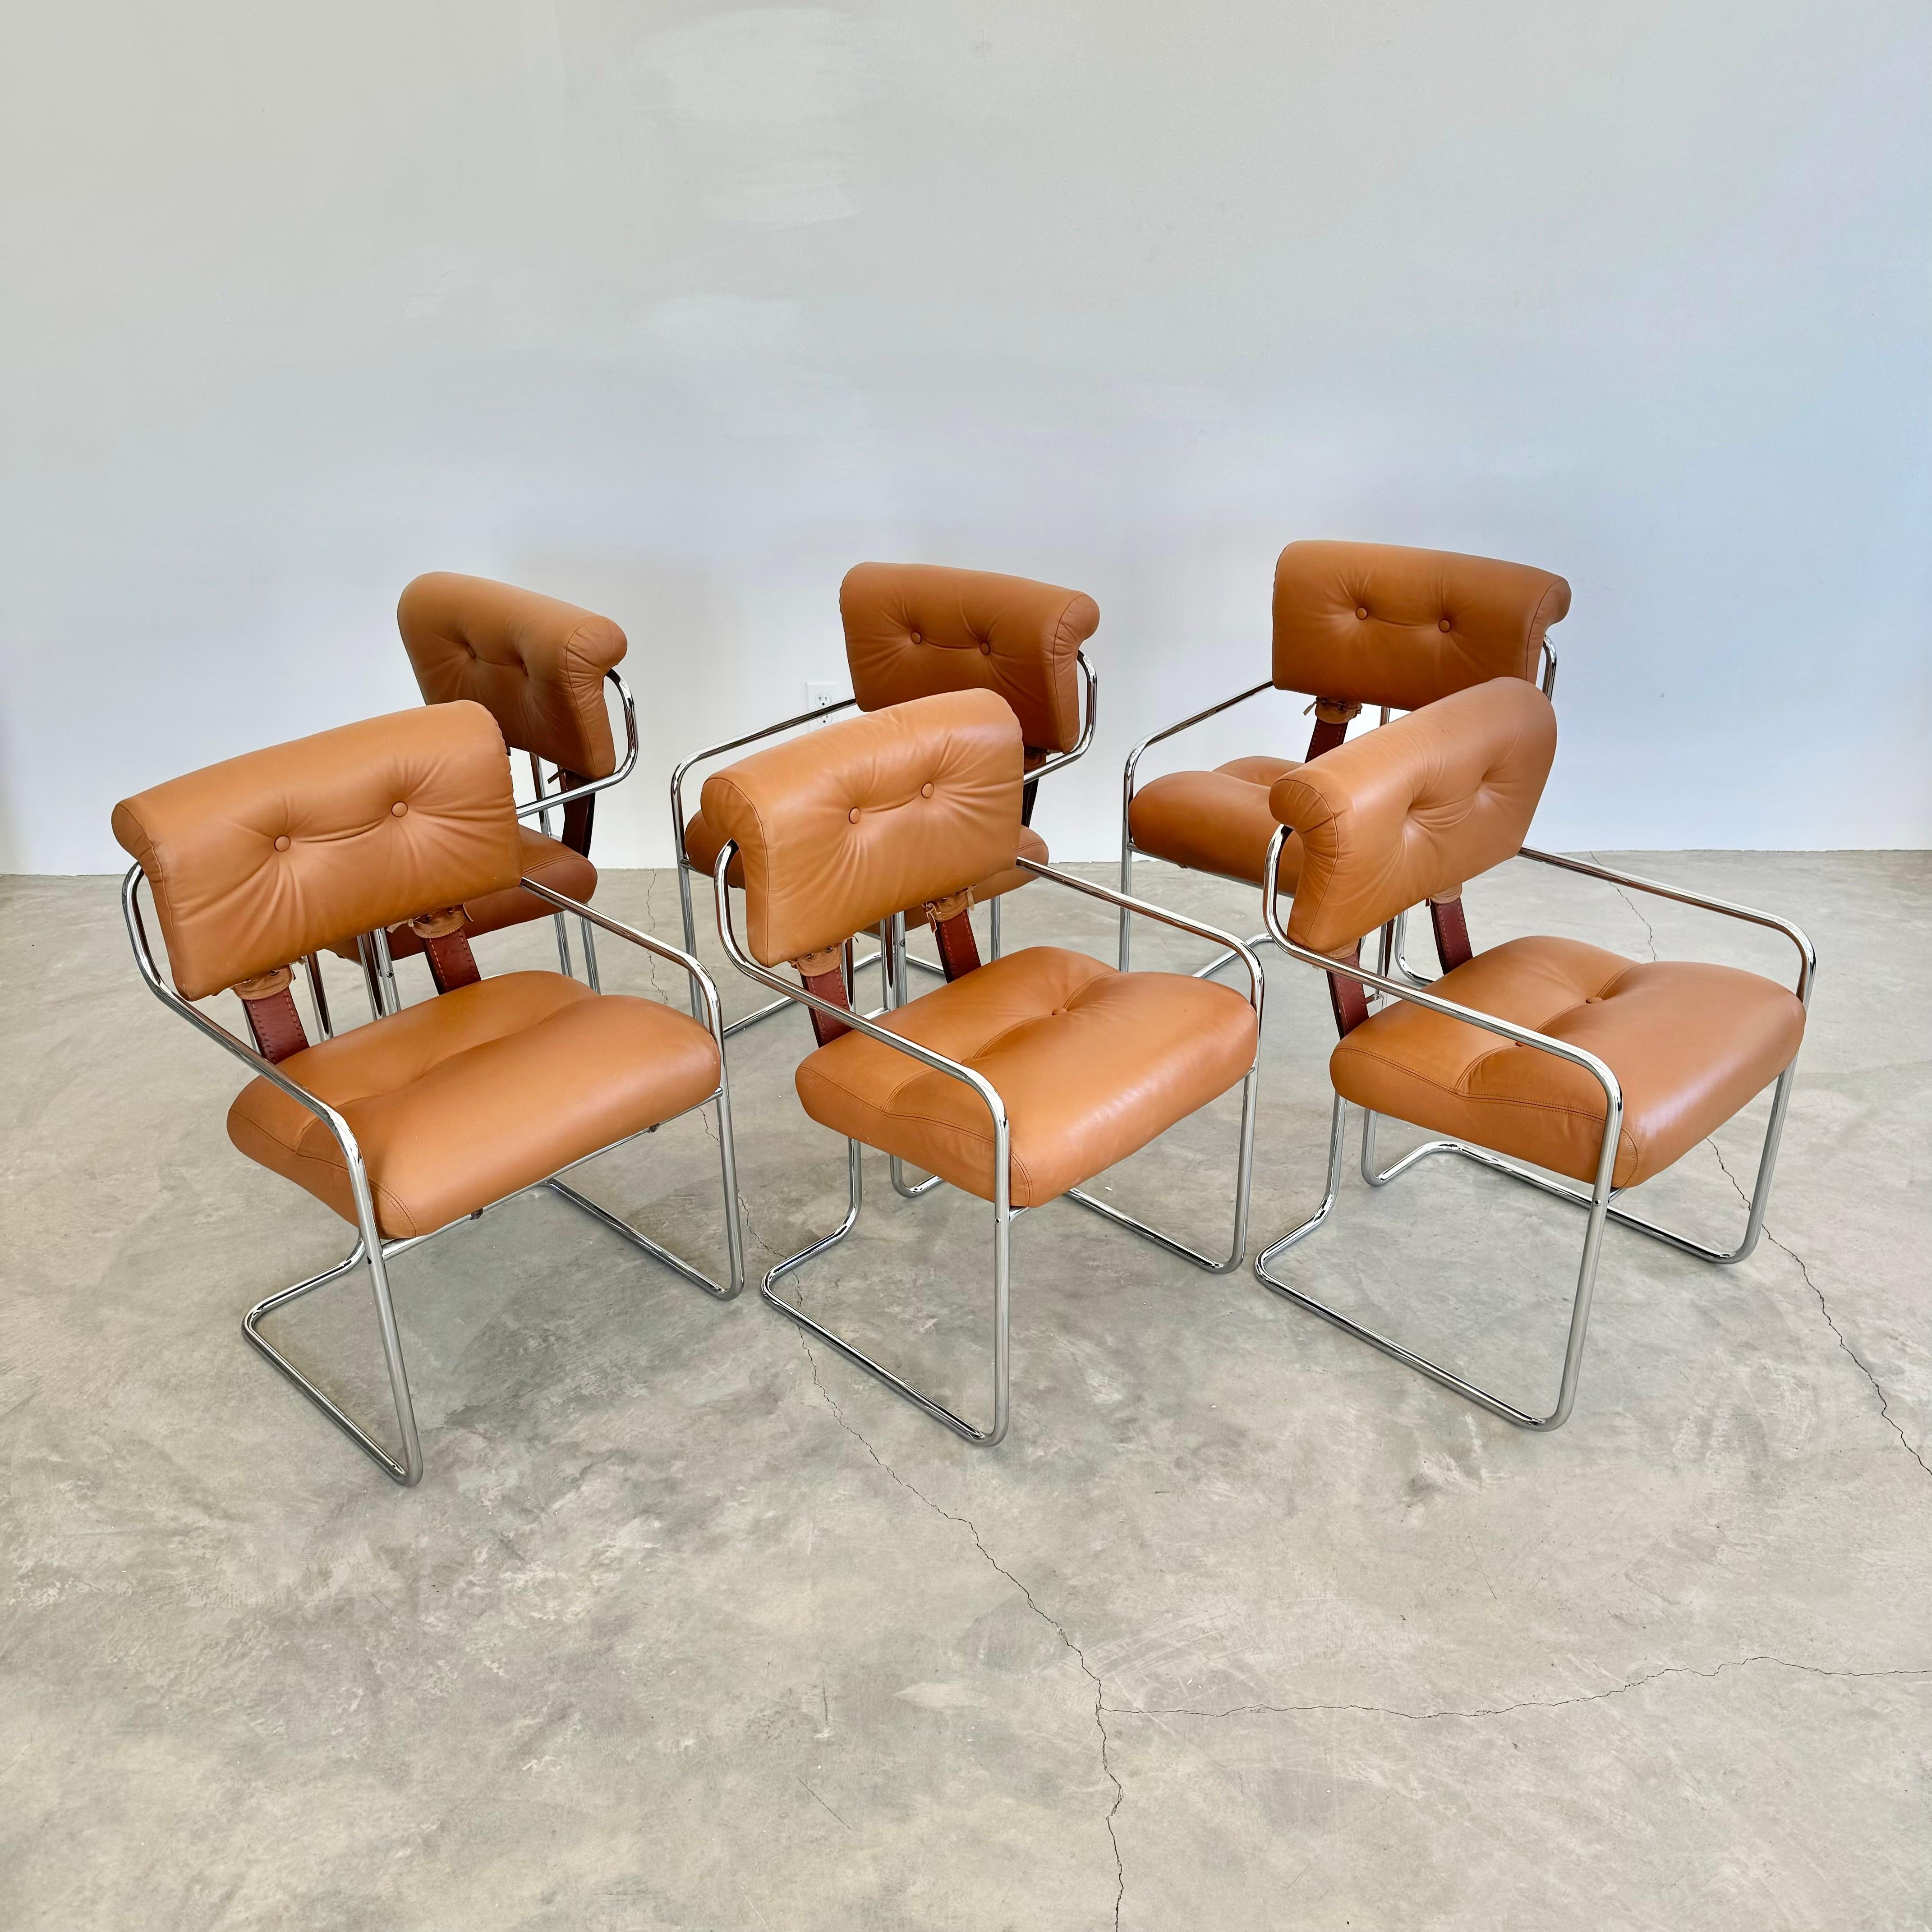 Set of 6 'Tucroma' Chairs in Tan by Guido Faleschini, 1970s Italy In Good Condition For Sale In Los Angeles, CA